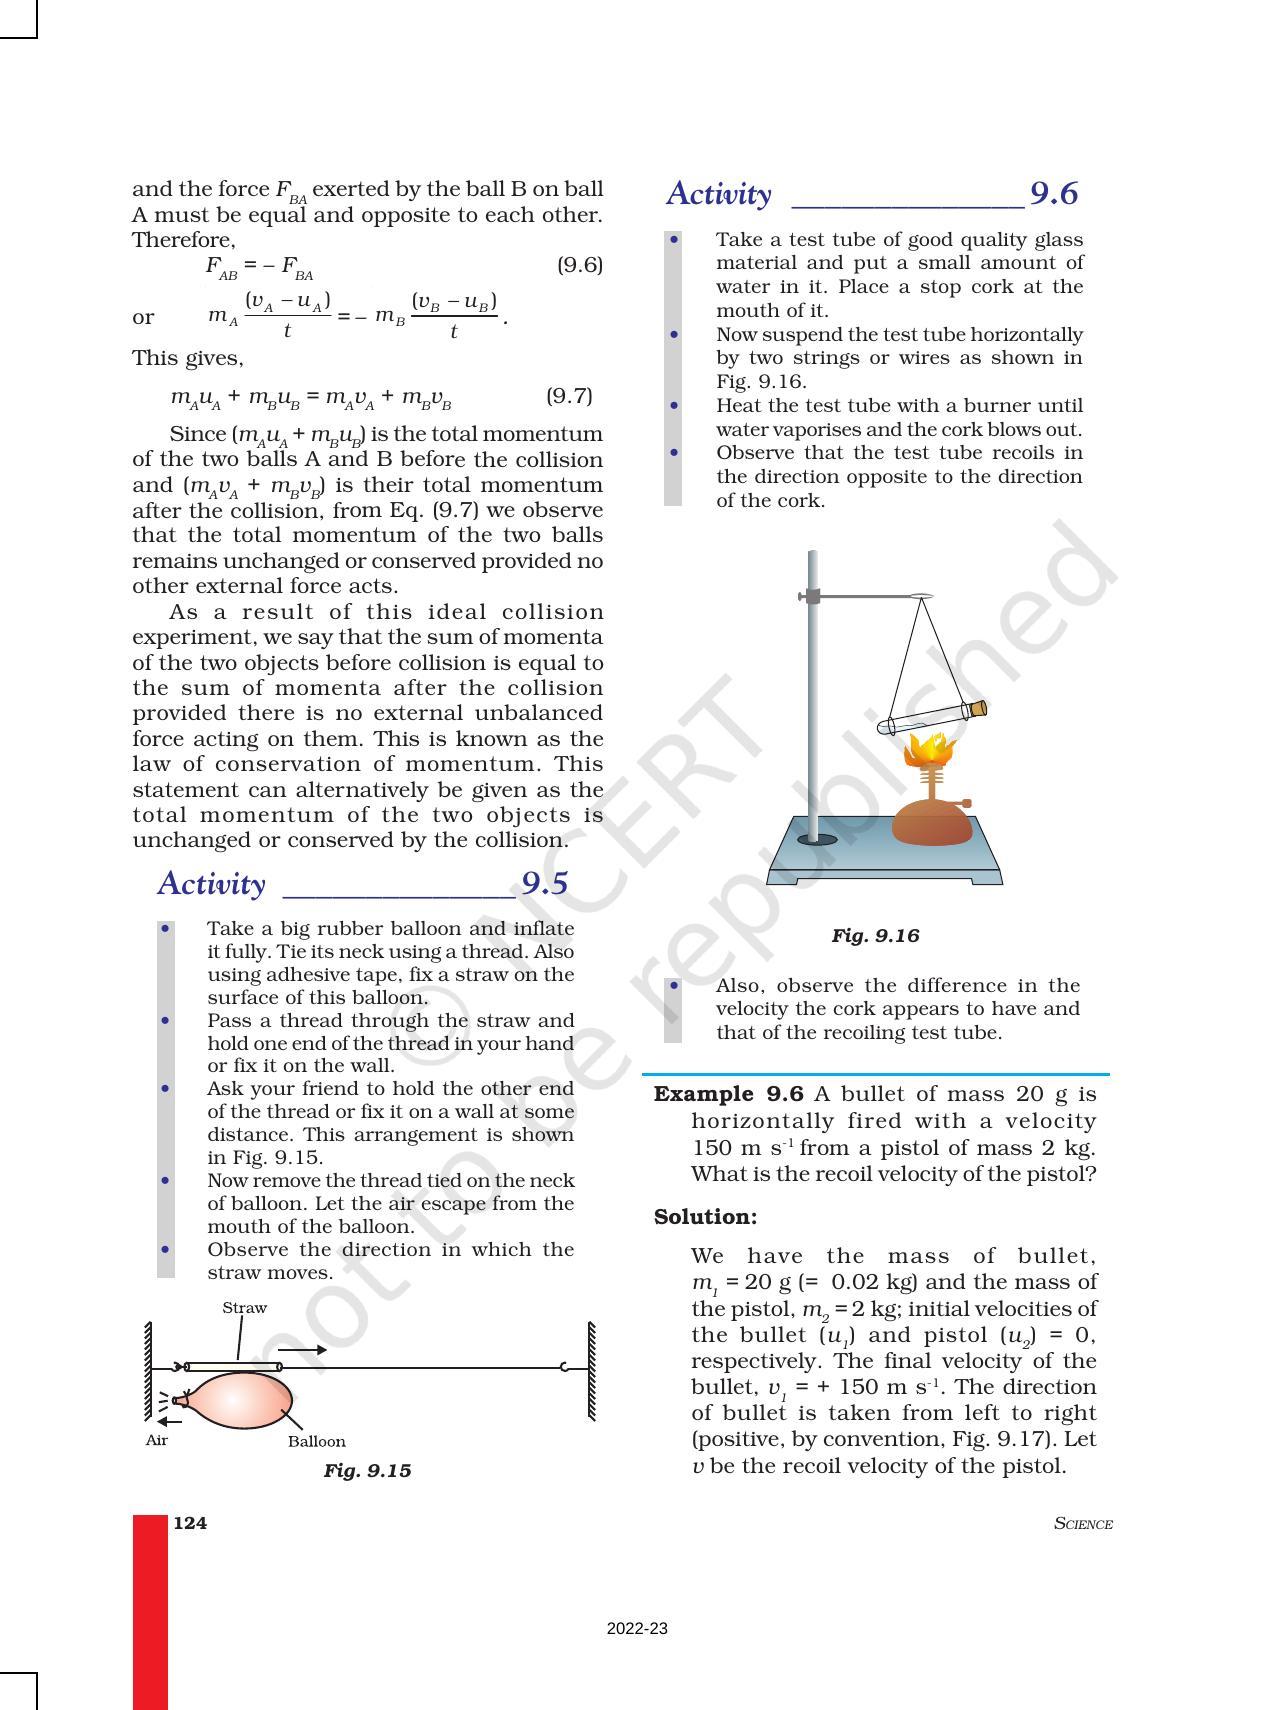 NCERT Book for Class 9 Science Chapter 9 Force And Laws Of Motion - Page 11